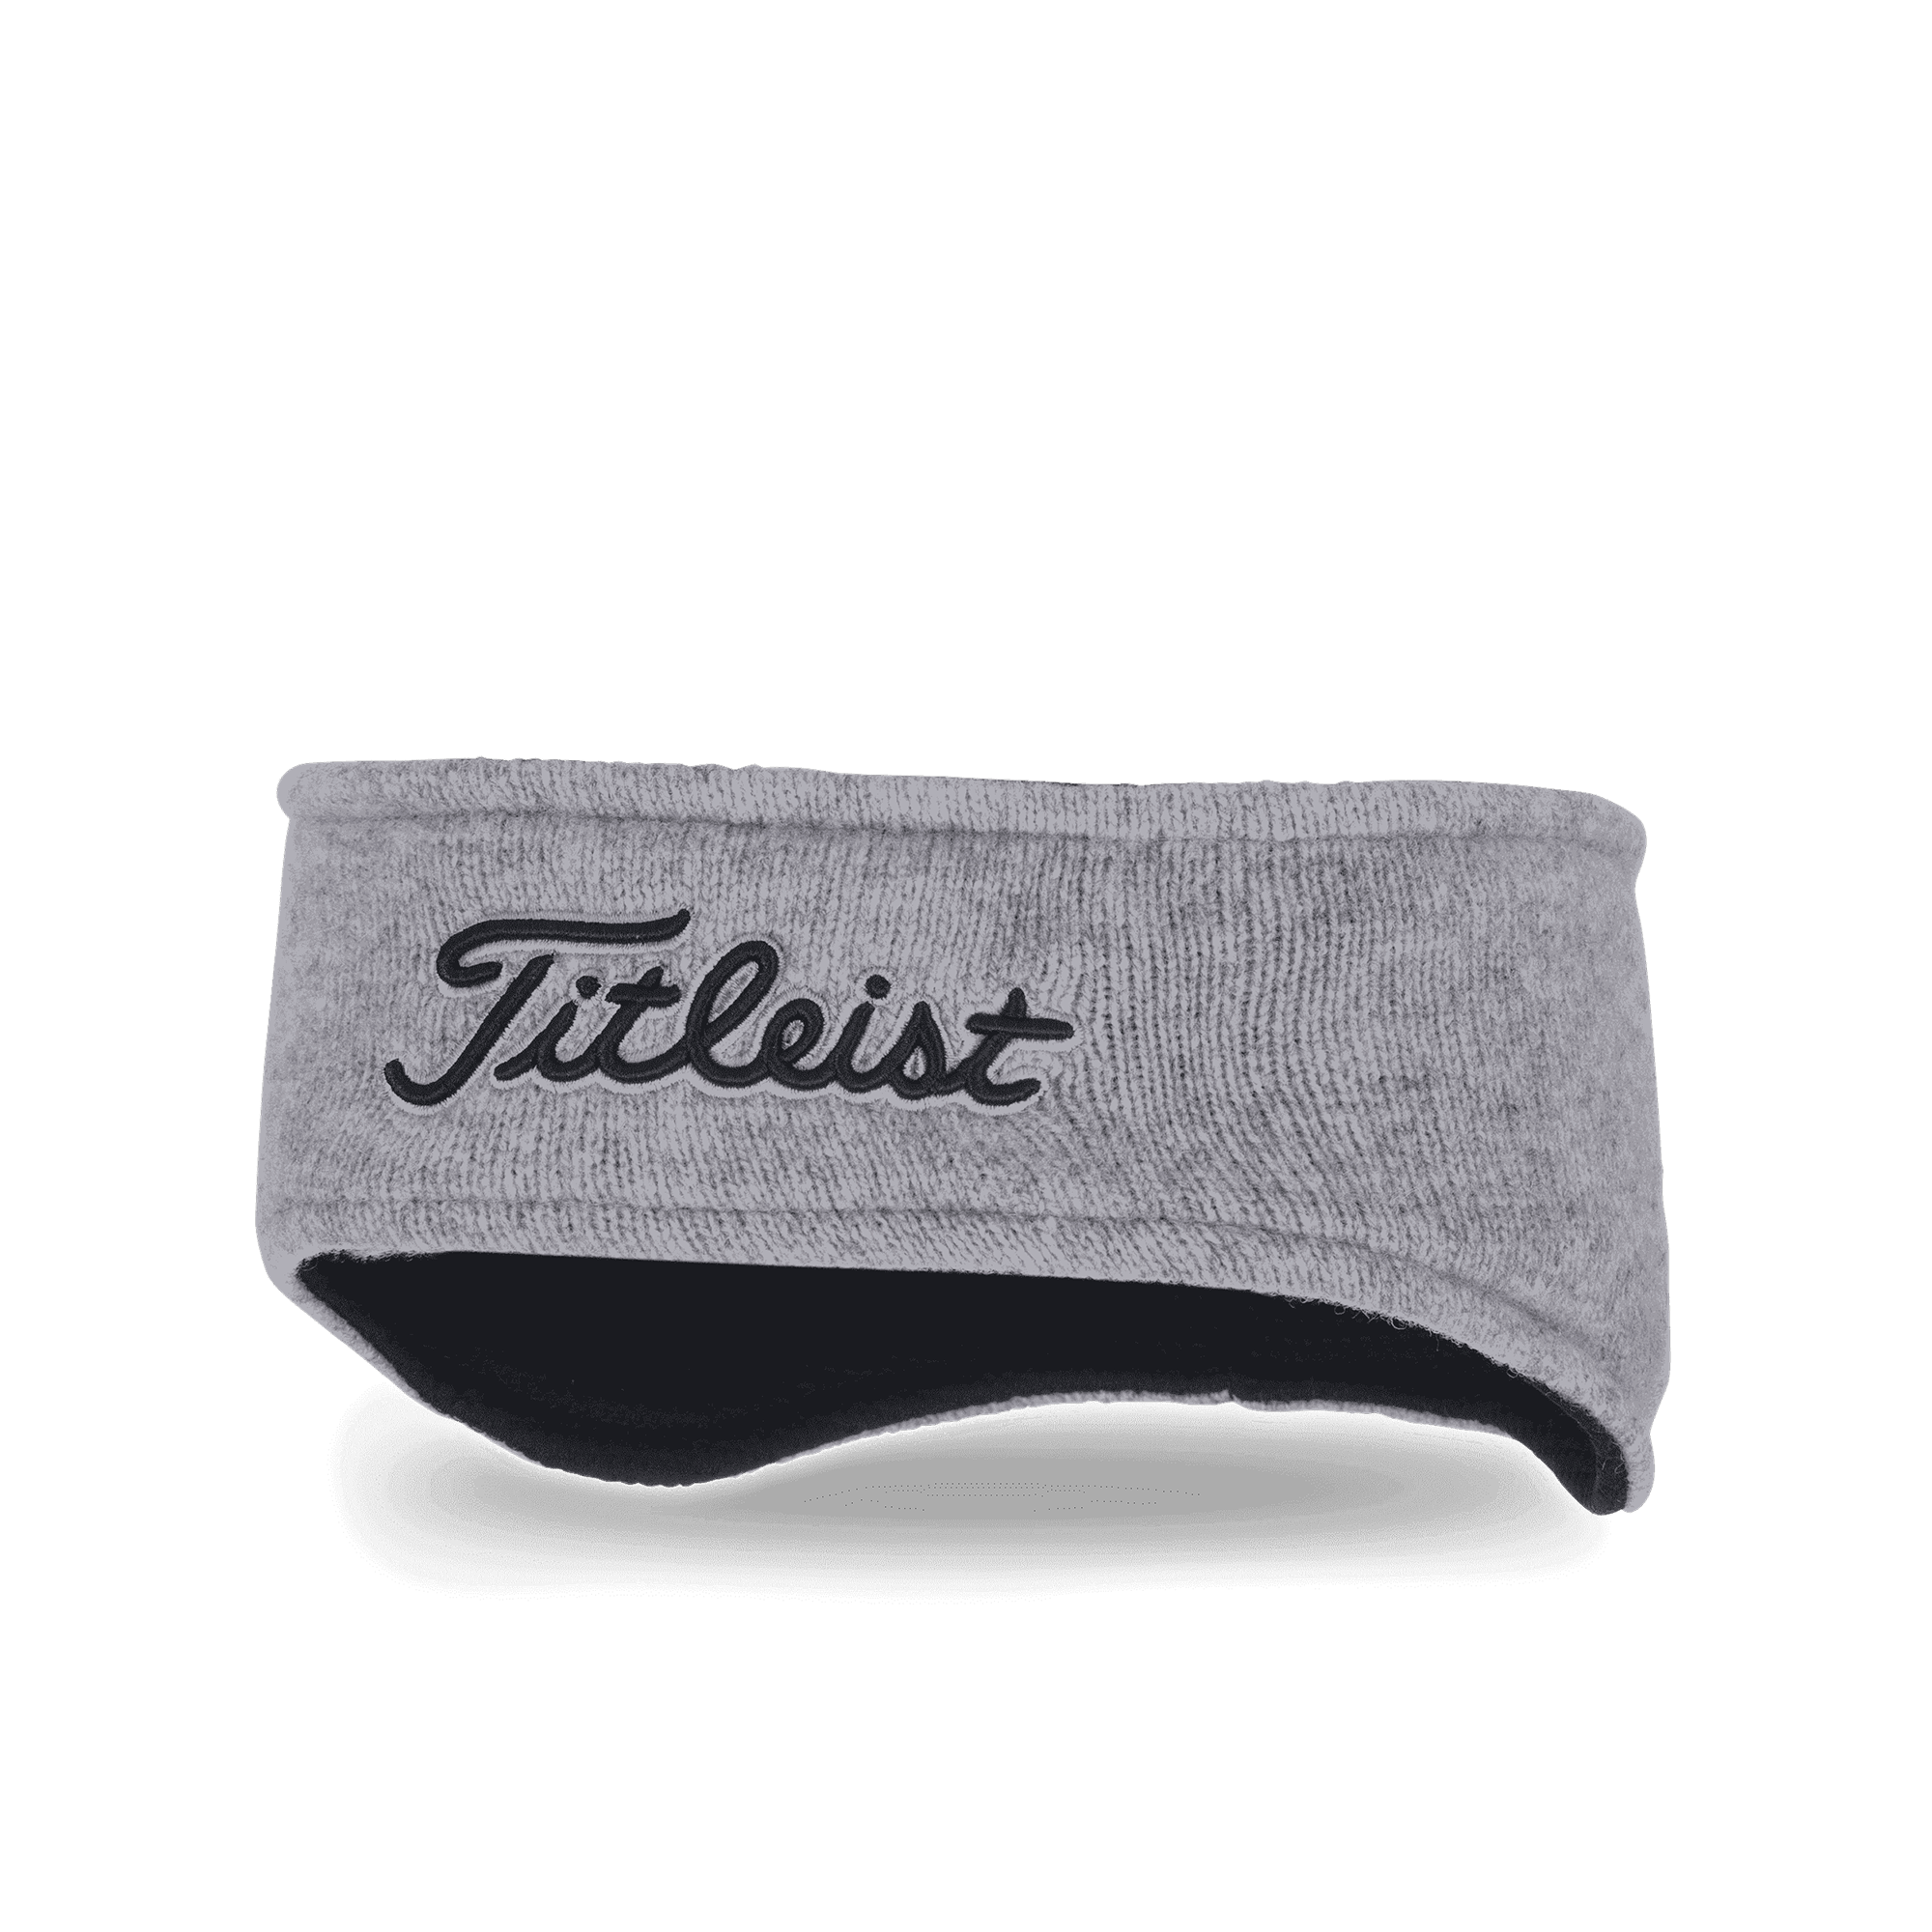 Titleist Official Merino Wool Earband in Gray/Black